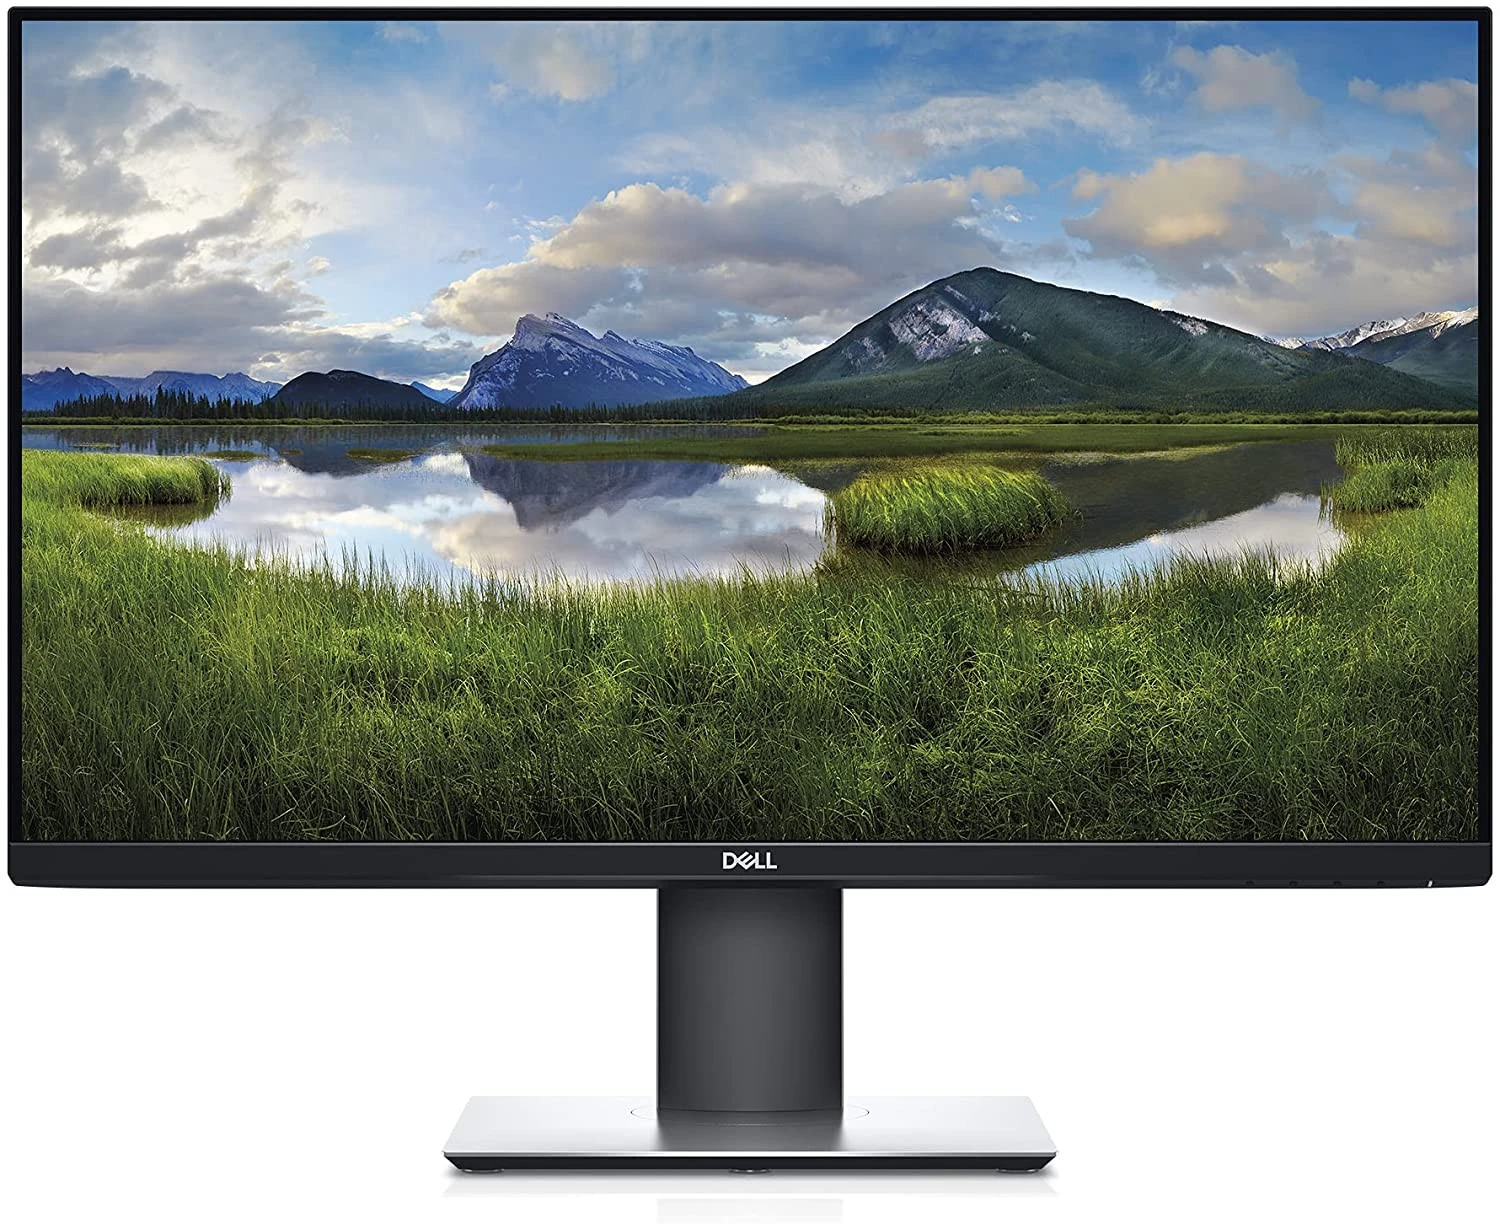 DELL P Series 27-Inch Screen Led-Lit Monitor (P2719H), Black